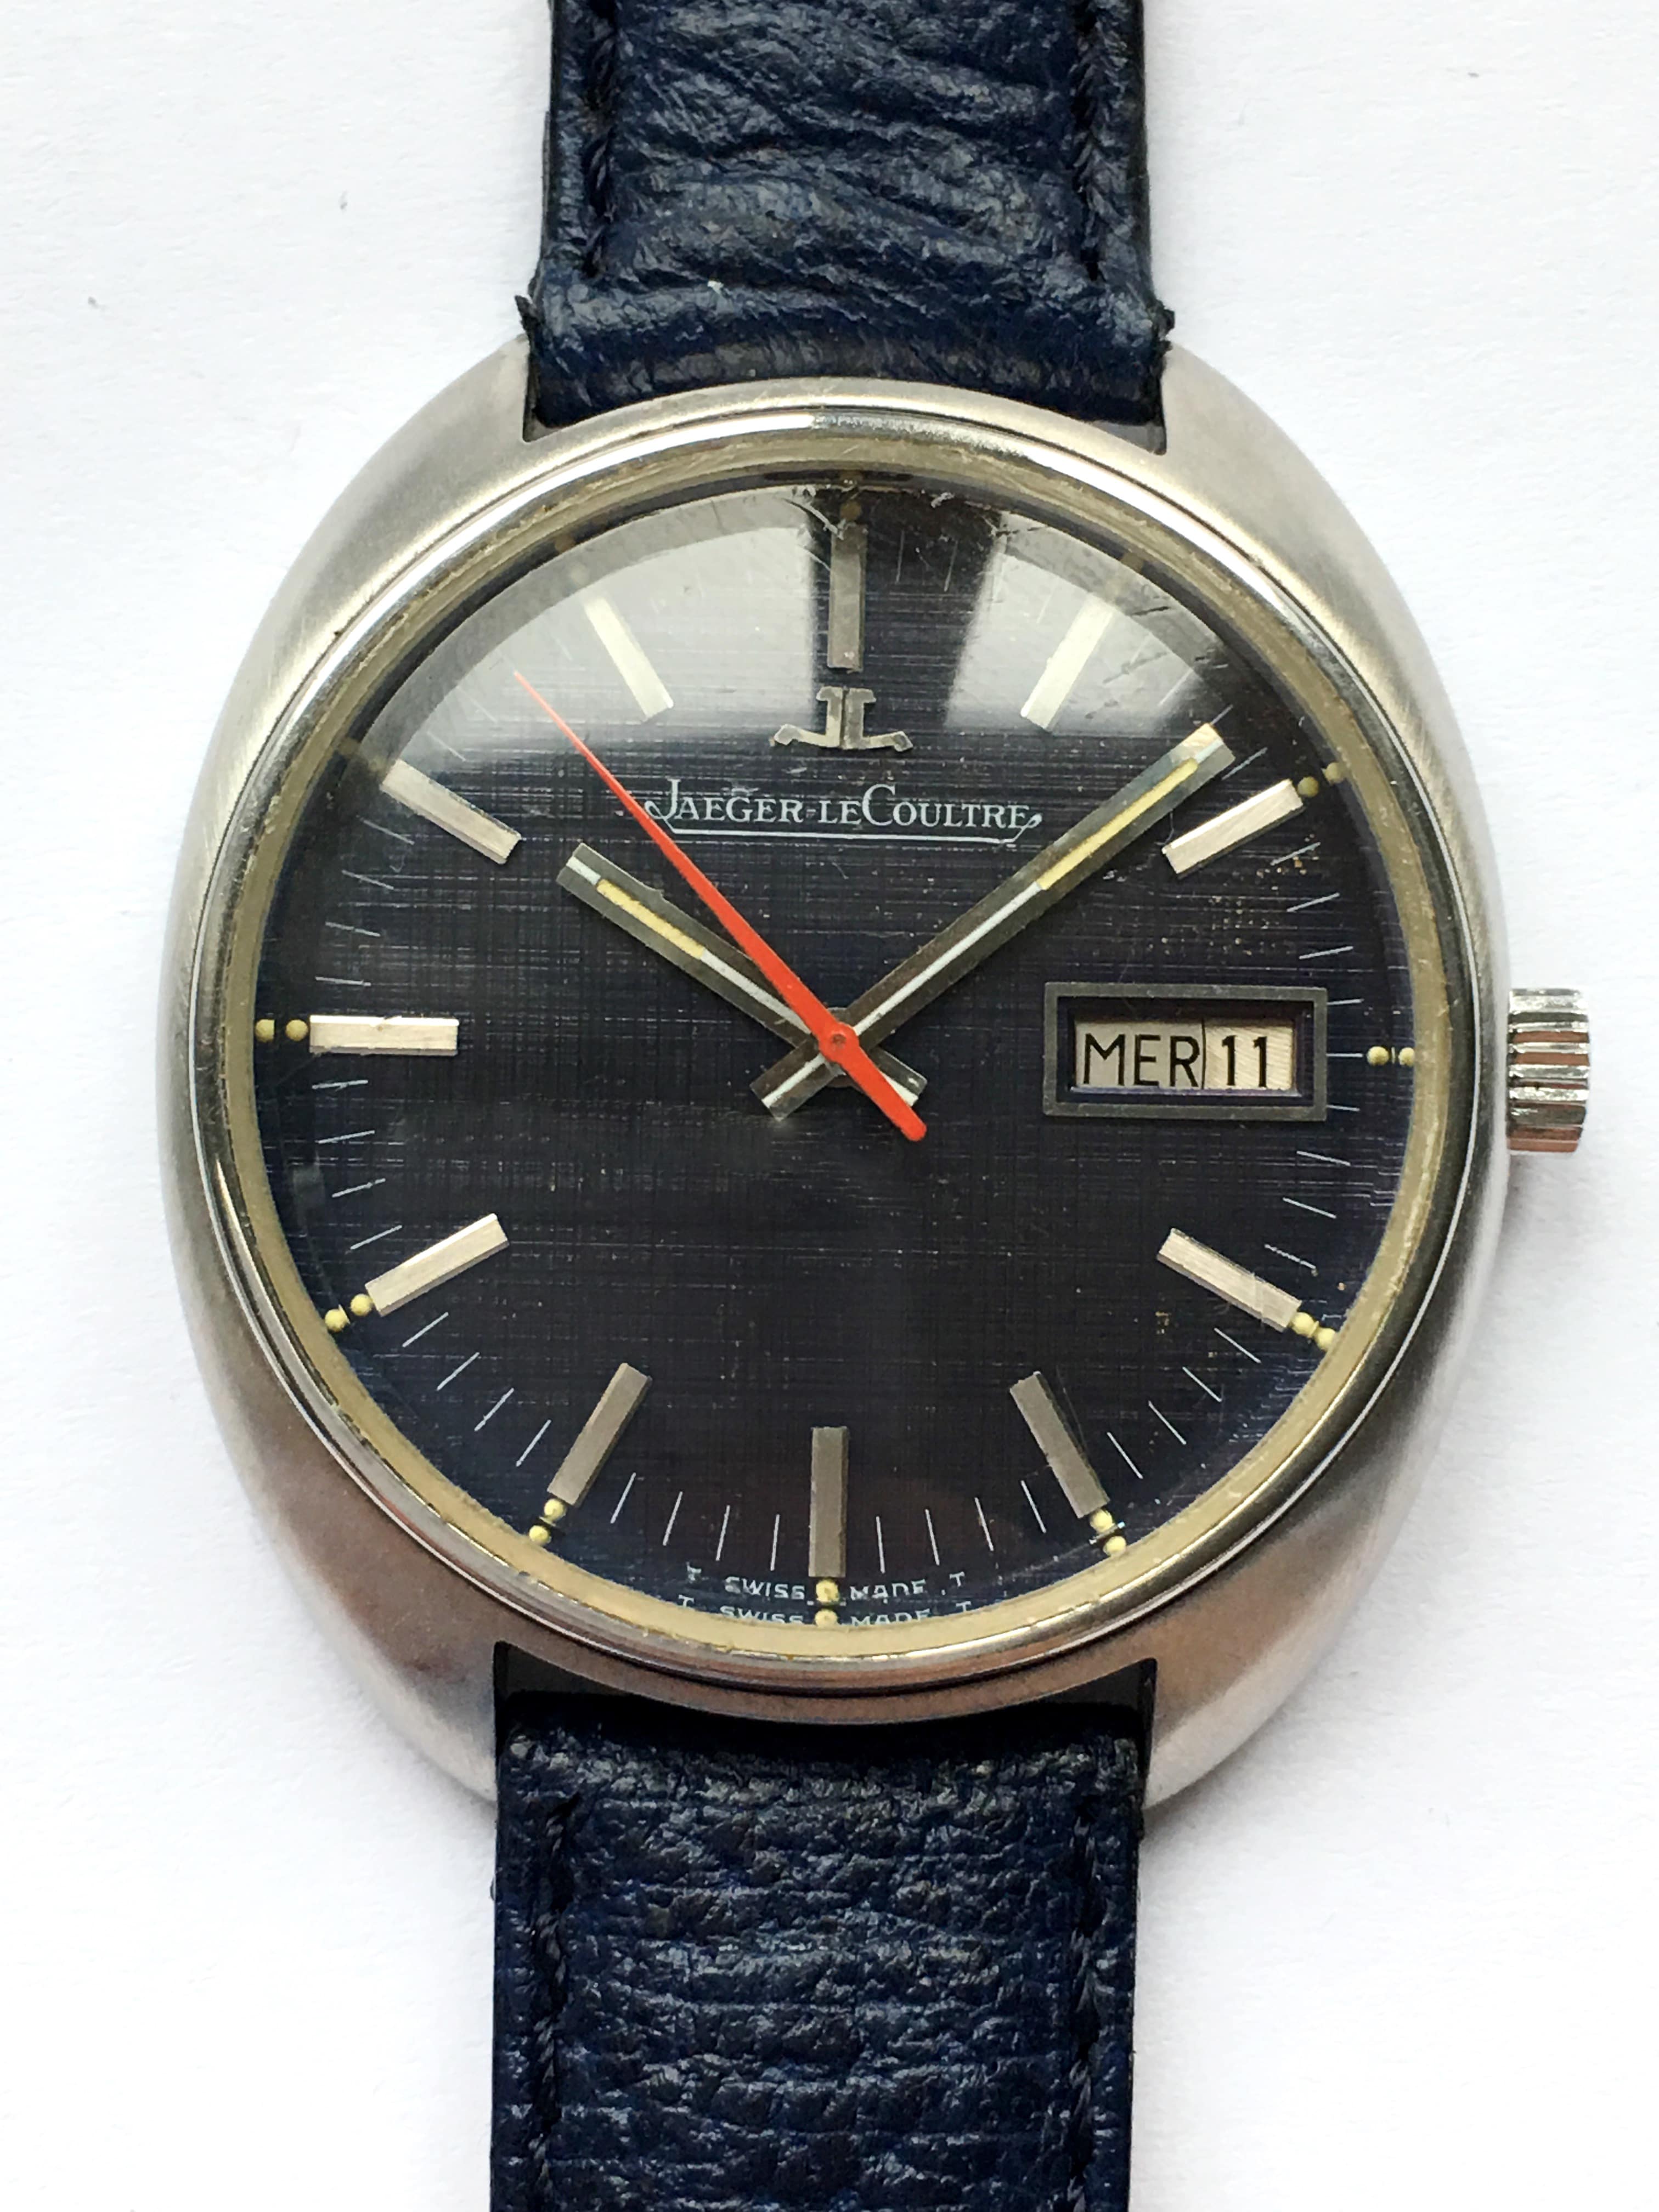 Auction Grade Jaeger LeCoultre Prototype sold at Sotheby's | Vintage ...